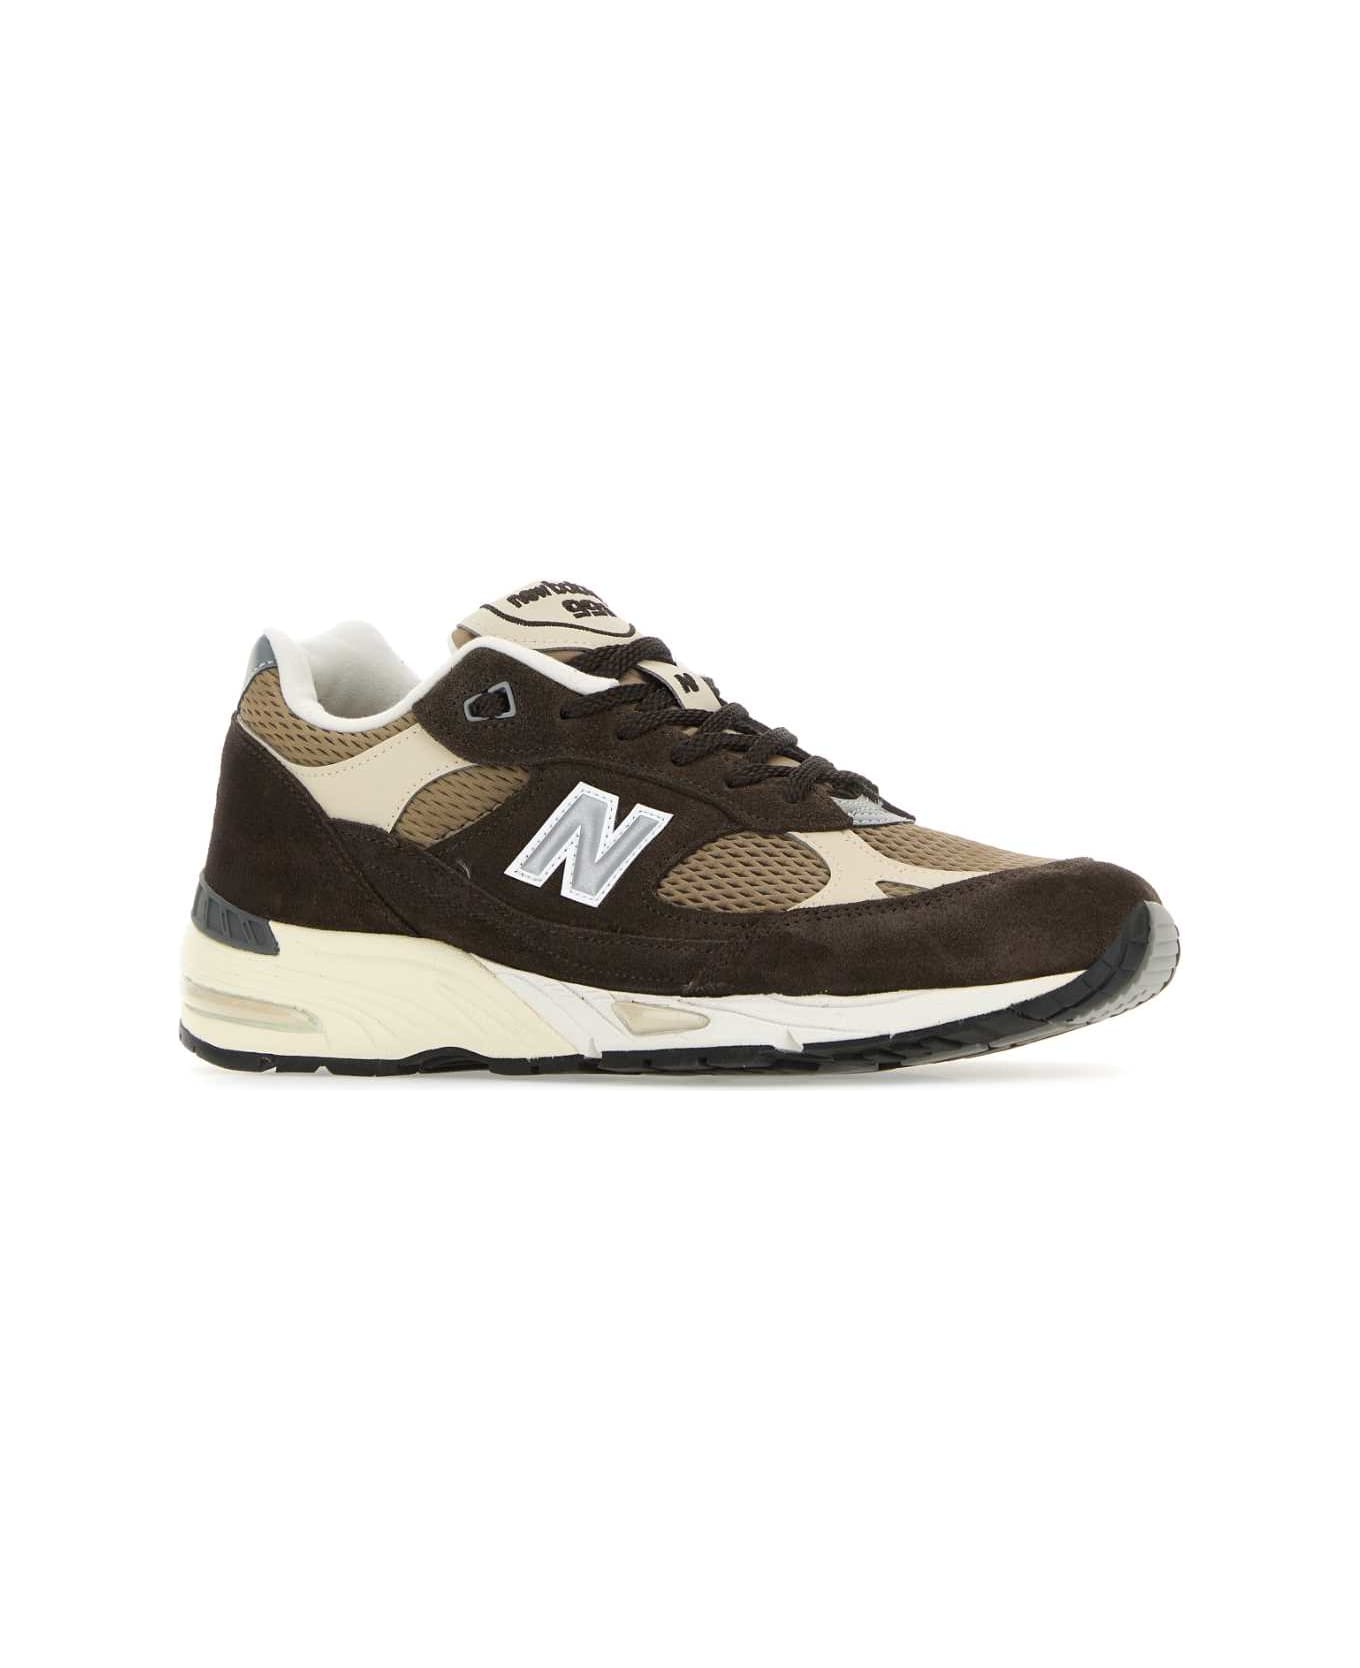 New Balance Brown Suede And Mesh 991v1 Sneakers - BROWN